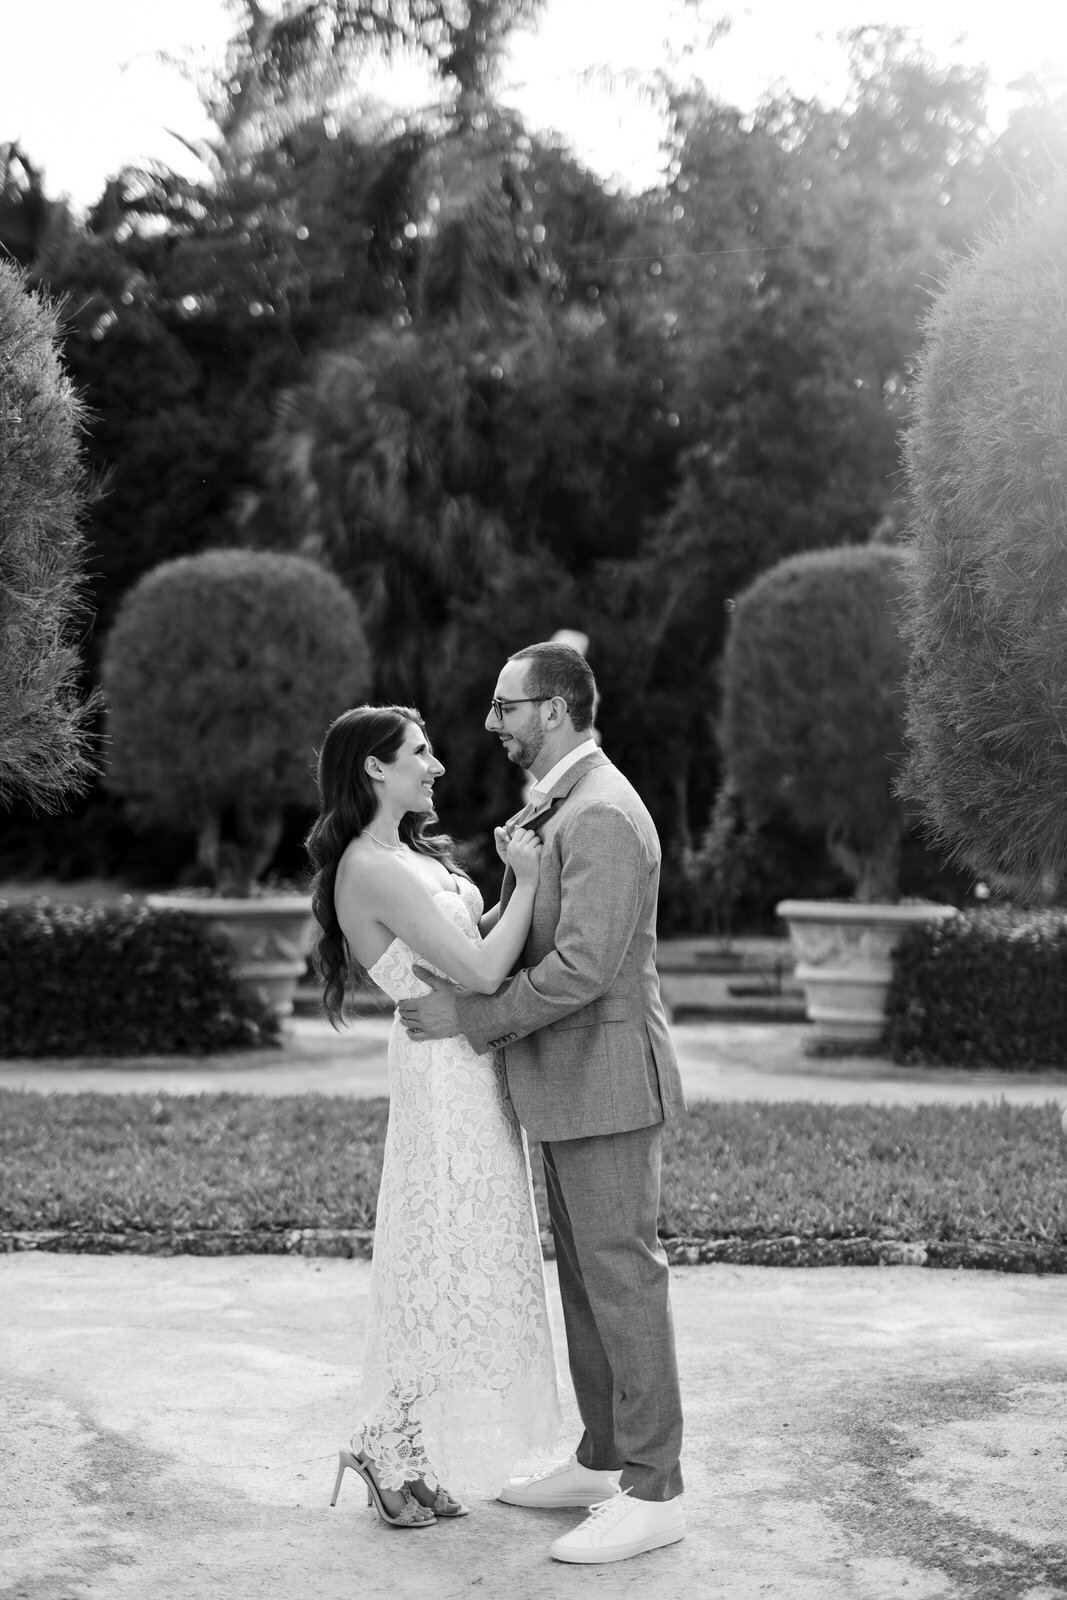 A Stylish and Chic Engagement Session at Vizcaya Museum in Miami Florida 5